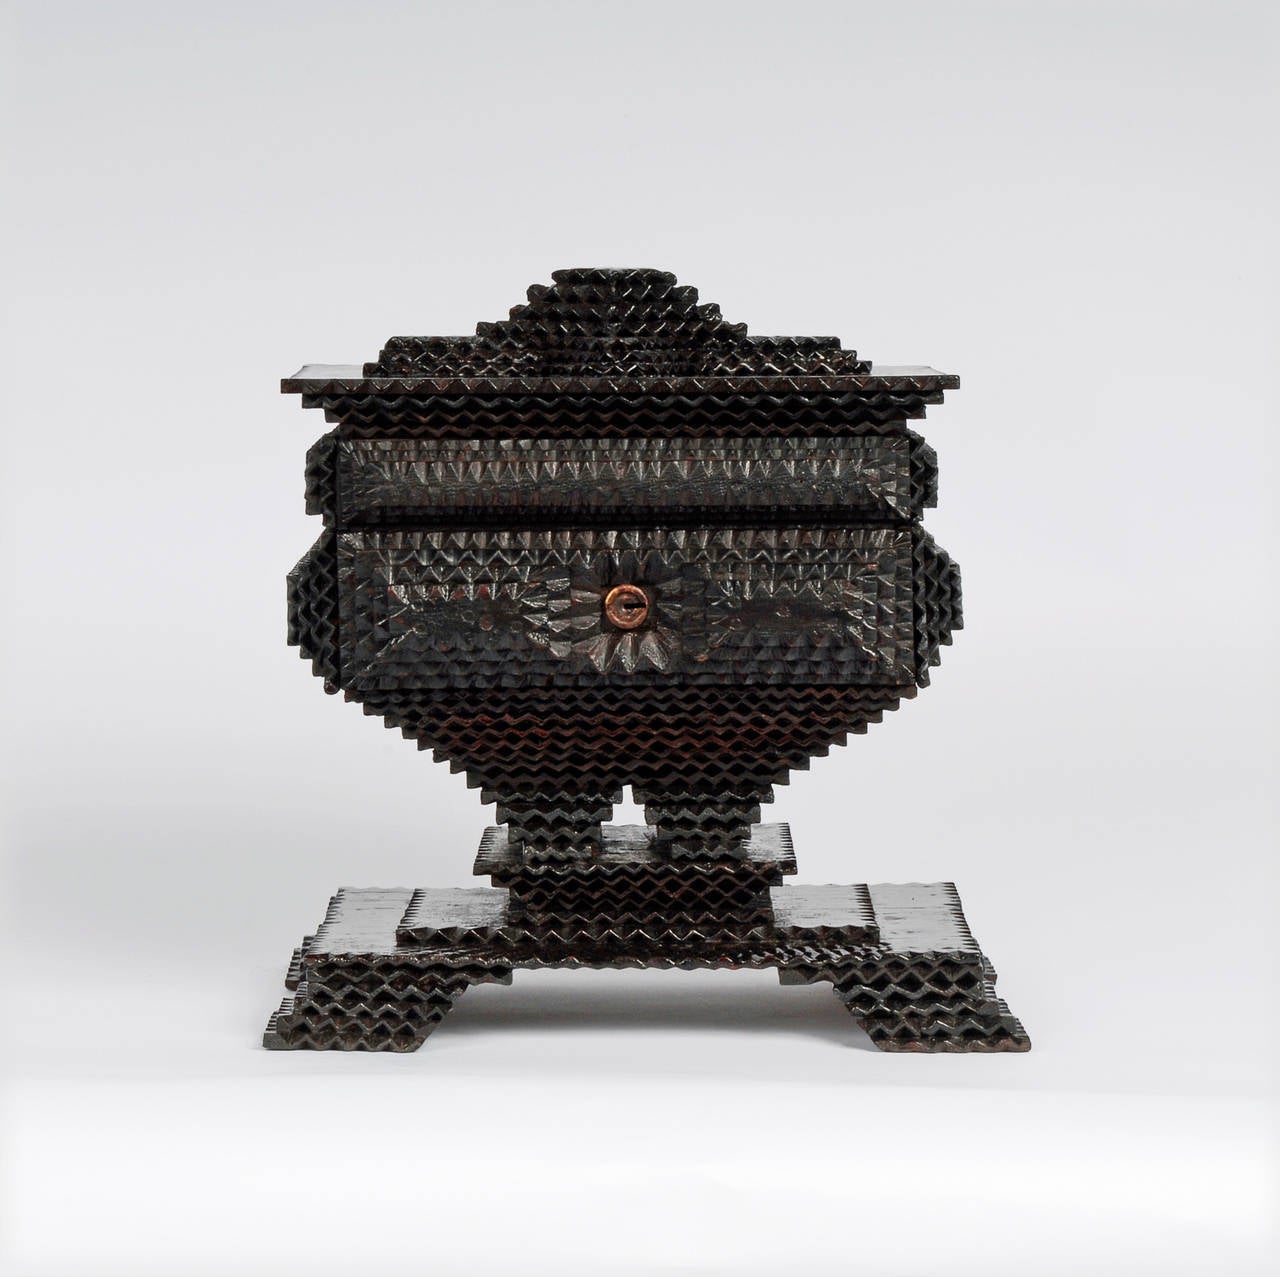 A fine Tramp Art pedestal box on a platform base with splayed legs. Of note is that the artist used several different carving techniques. He used typical chip carving around the central compartment, double-sided or wave notching in other areas (an